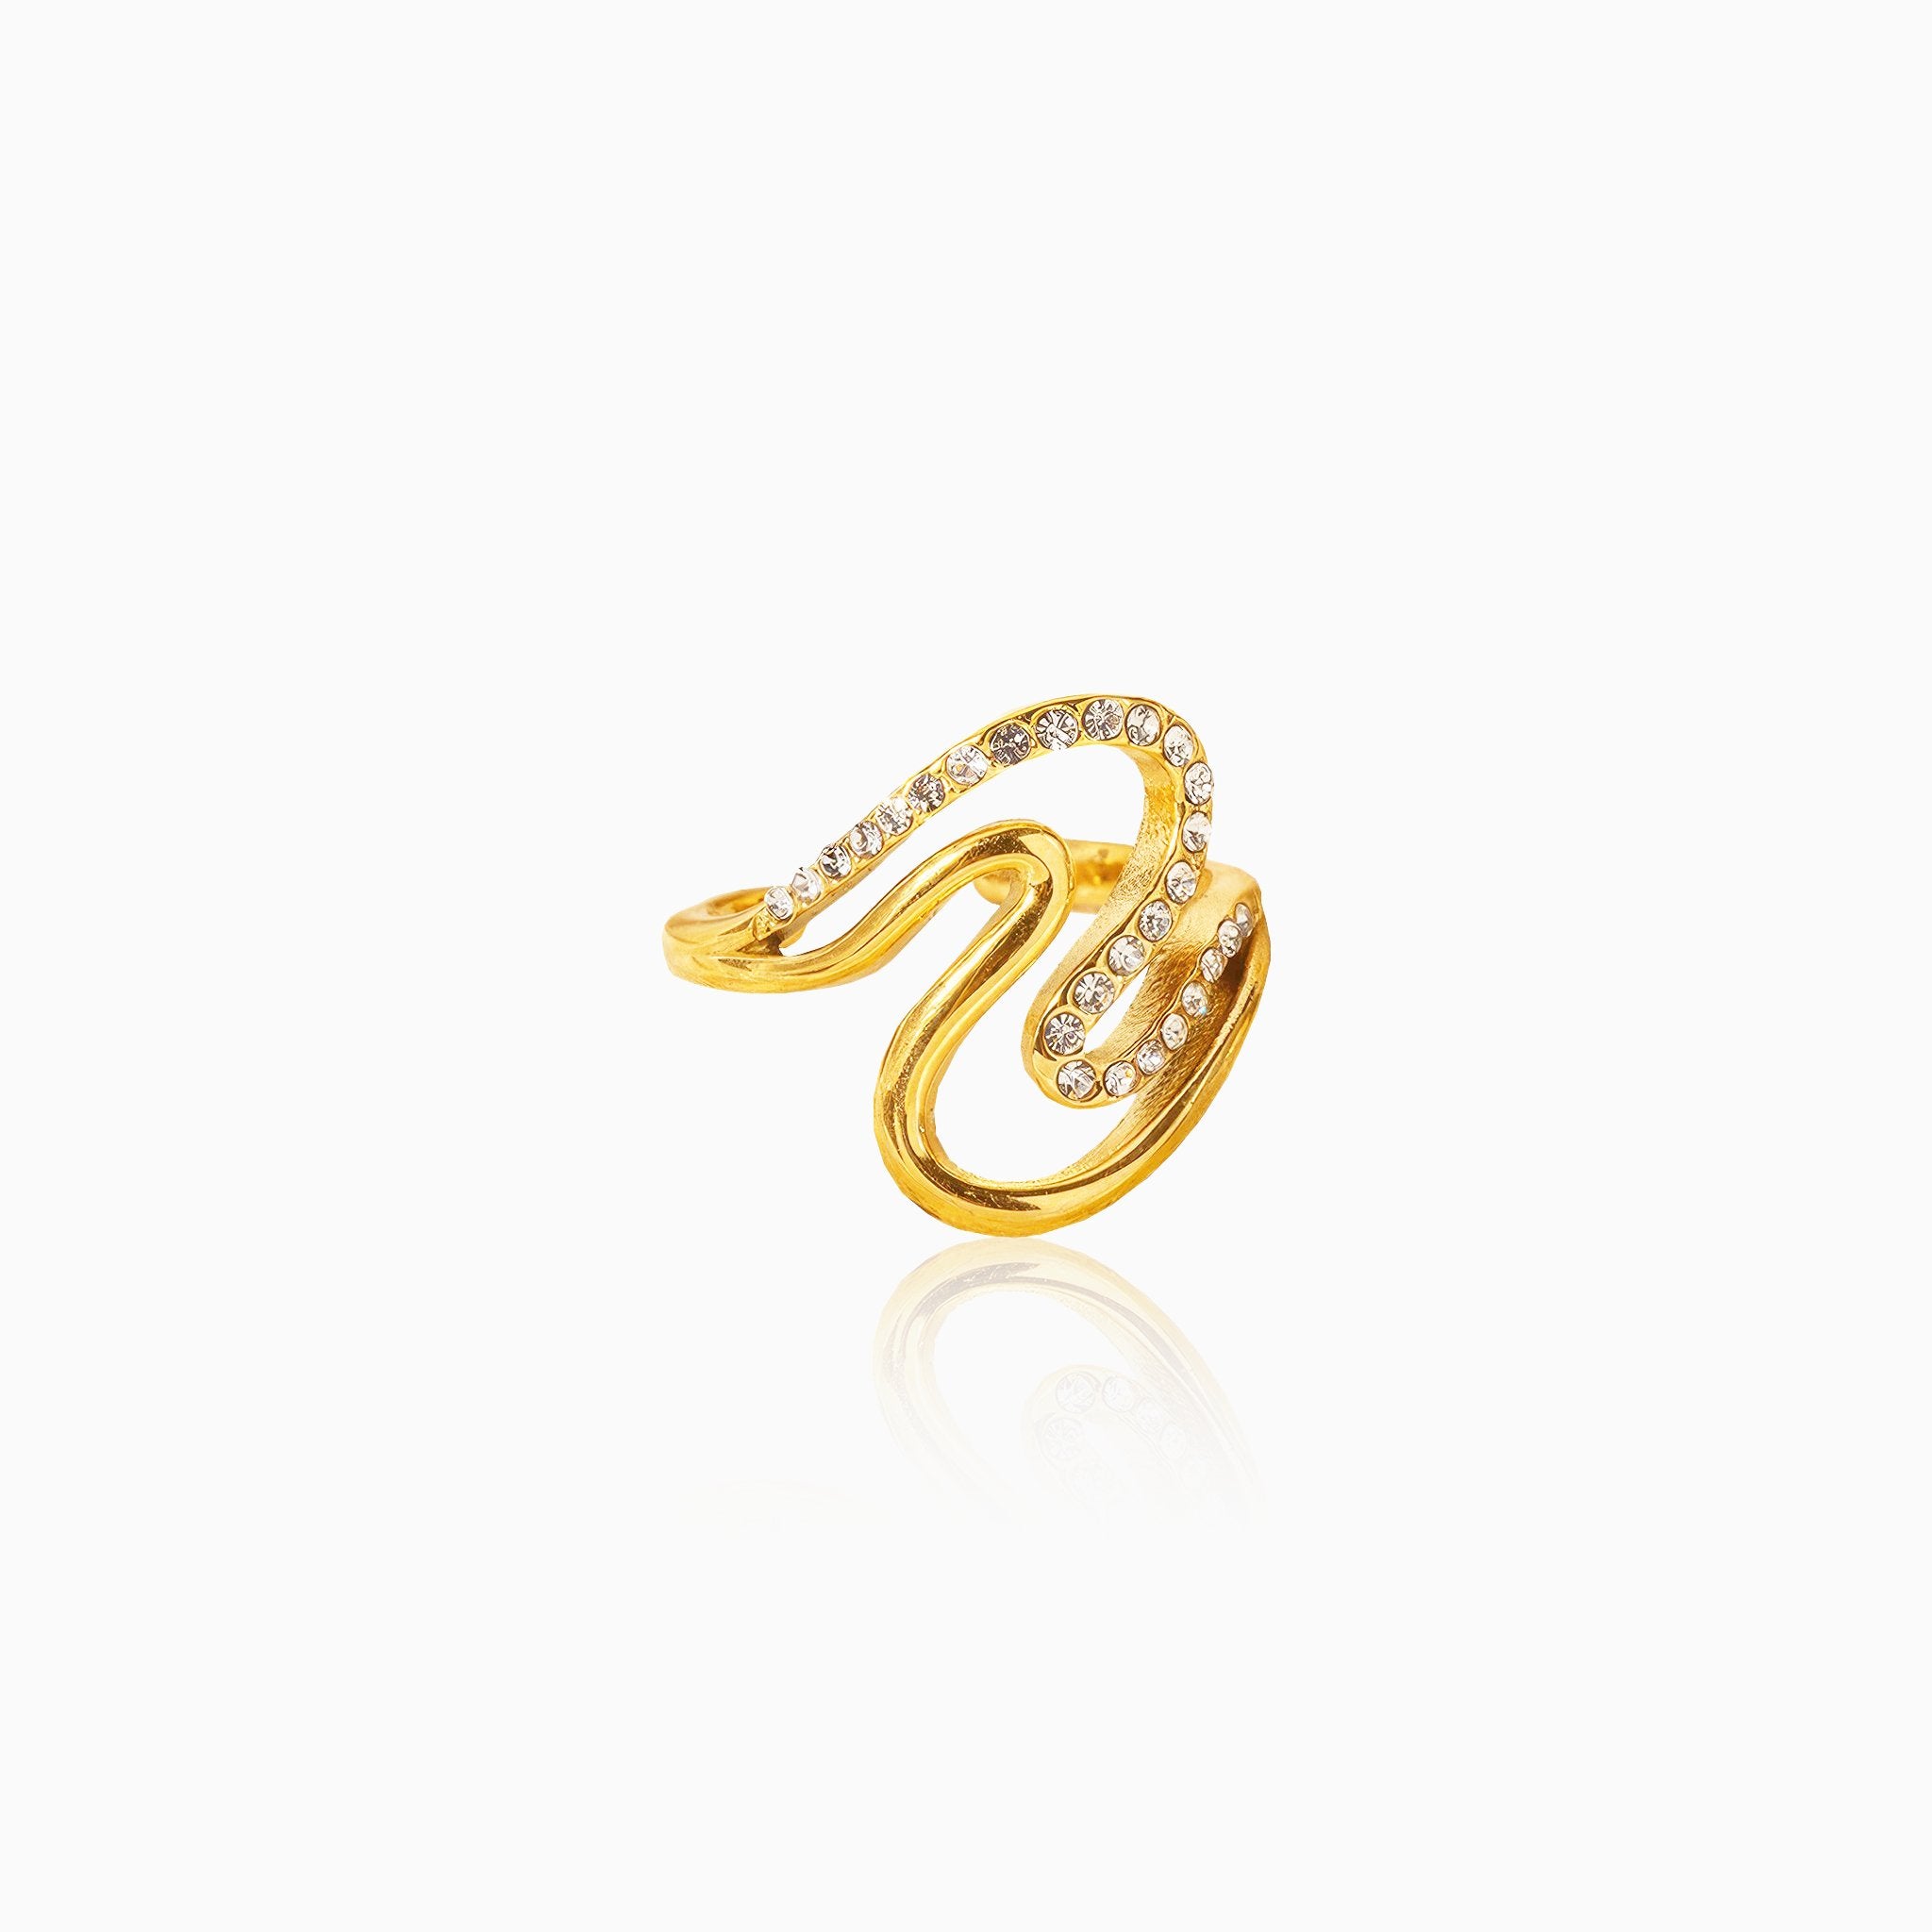 Double Layer Geometric Ring with Gemstones - Nobbier - Ring - 18K Gold And Titanium PVD Coated Jewelry